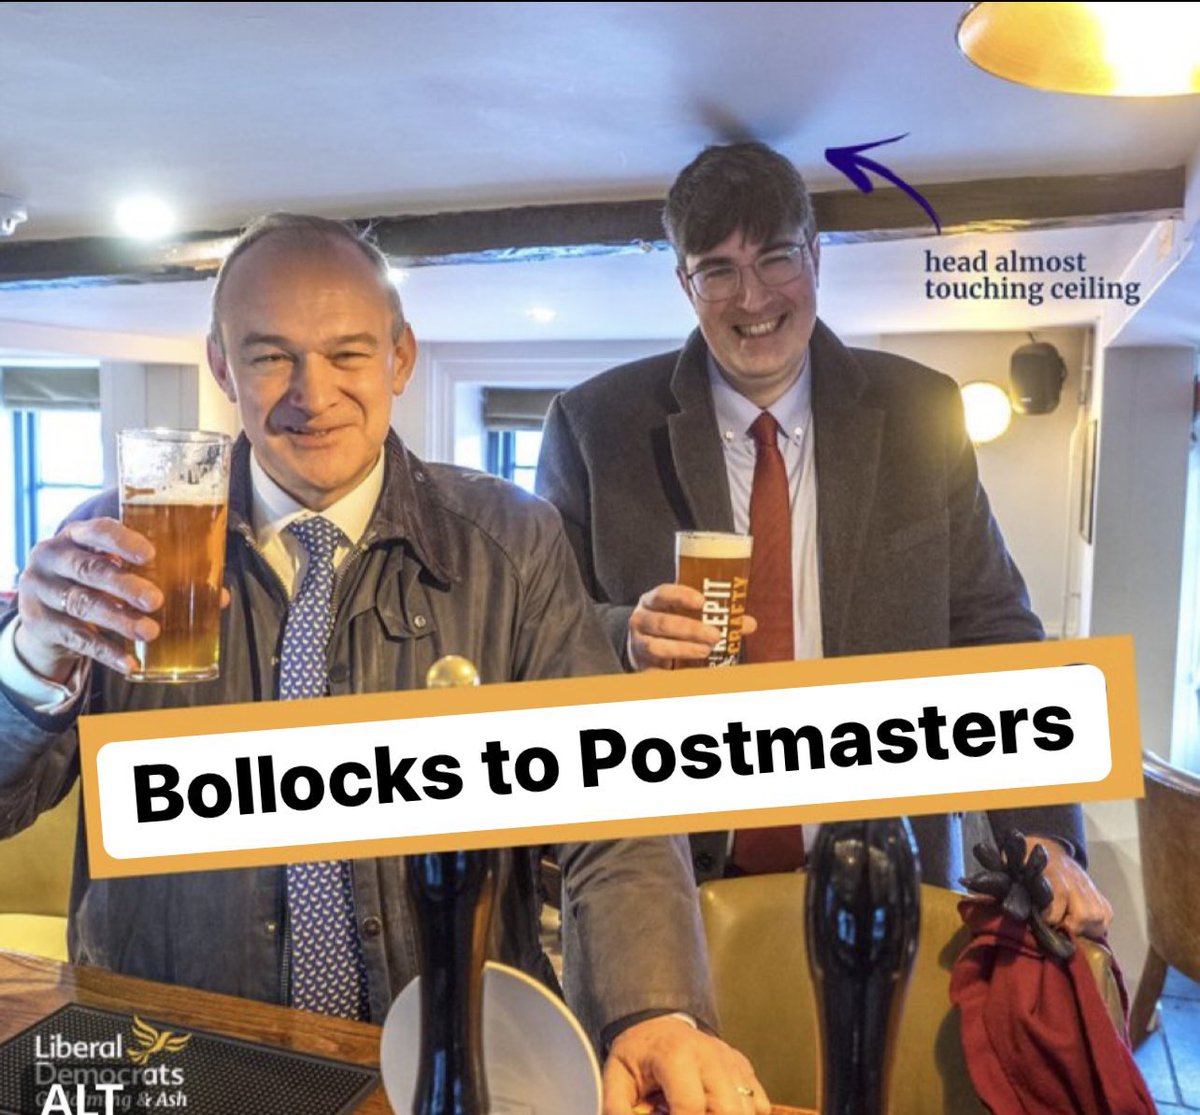 @LibDems Got anything to say on behalf of your insignificant leader regarding the mental health of the postmasters he ignored? This is what he thinks of them⬇️ #postofficeinquiry